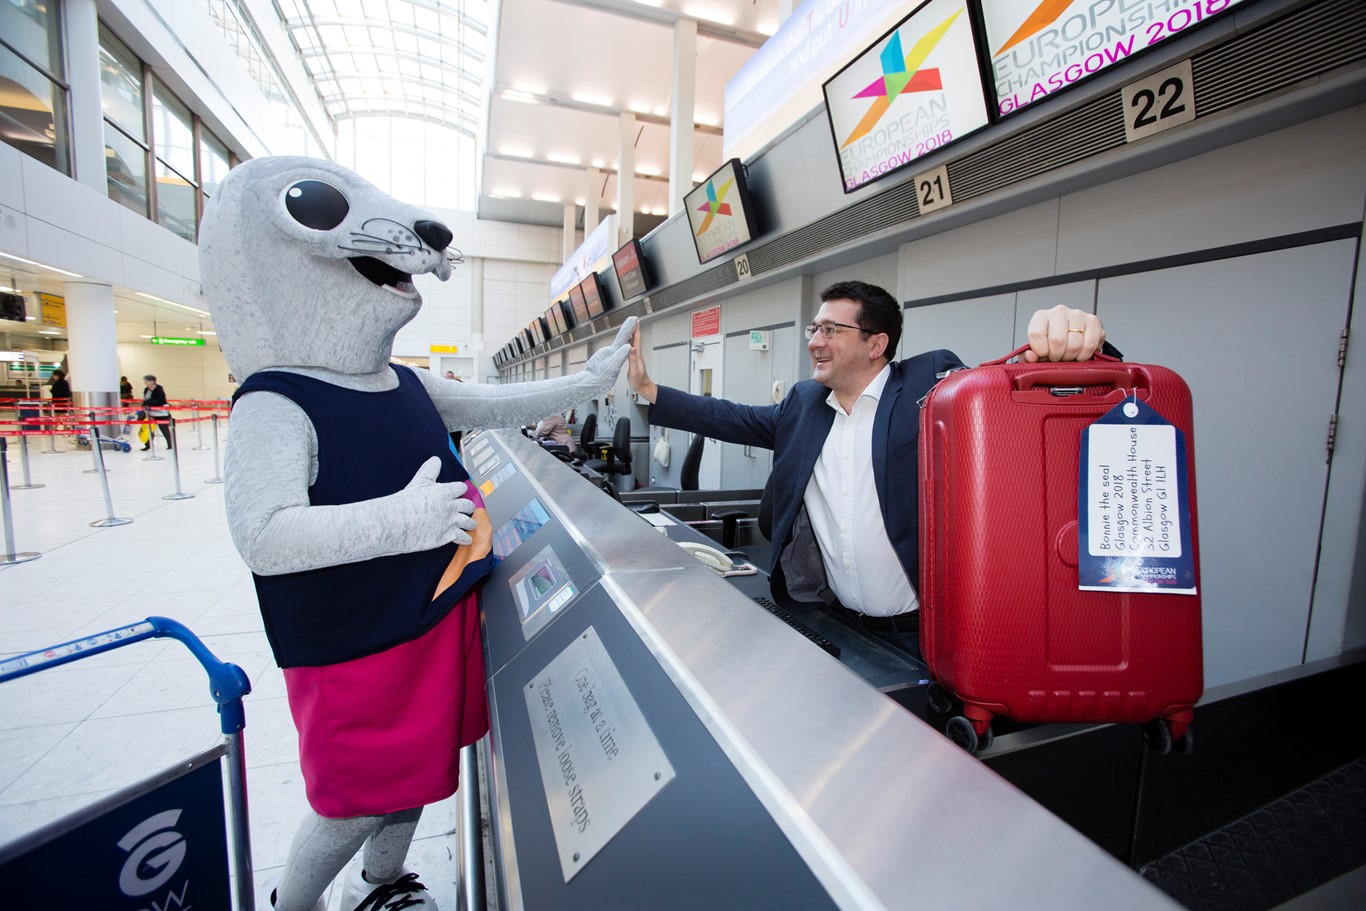 Bonnie the seal checks in as Glasgow Airport becomes latest Glasgow 2018 Official Supporter